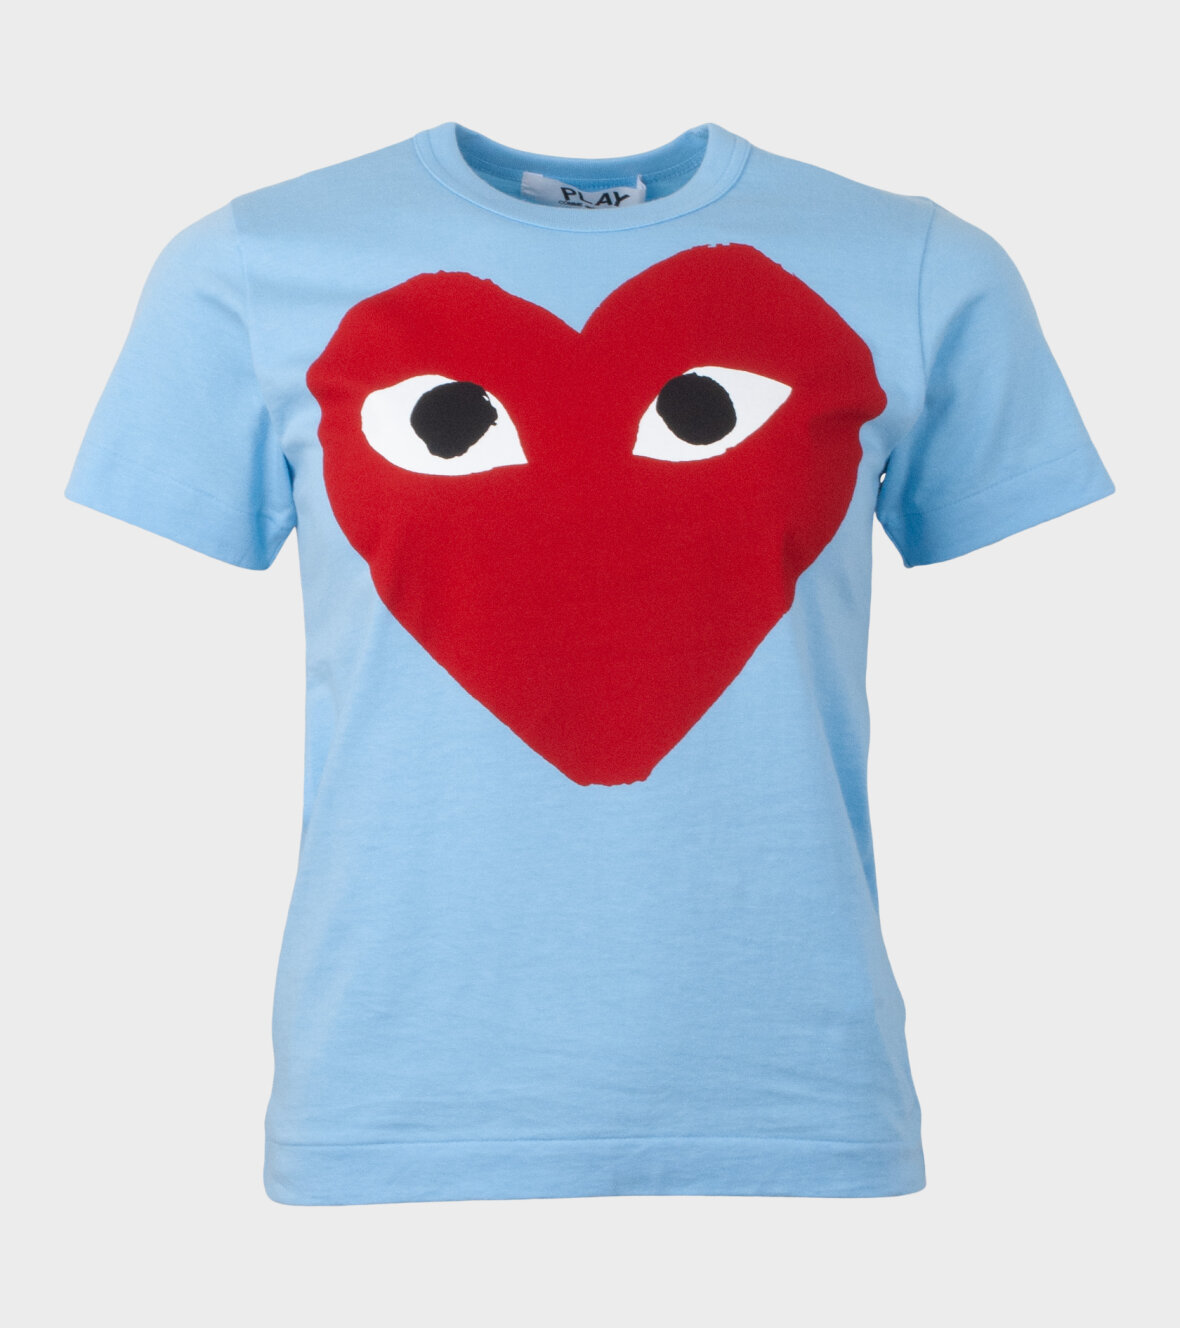 dr. Adams - Comme des Garcons PLAY W Red Heart T-shirt Blue